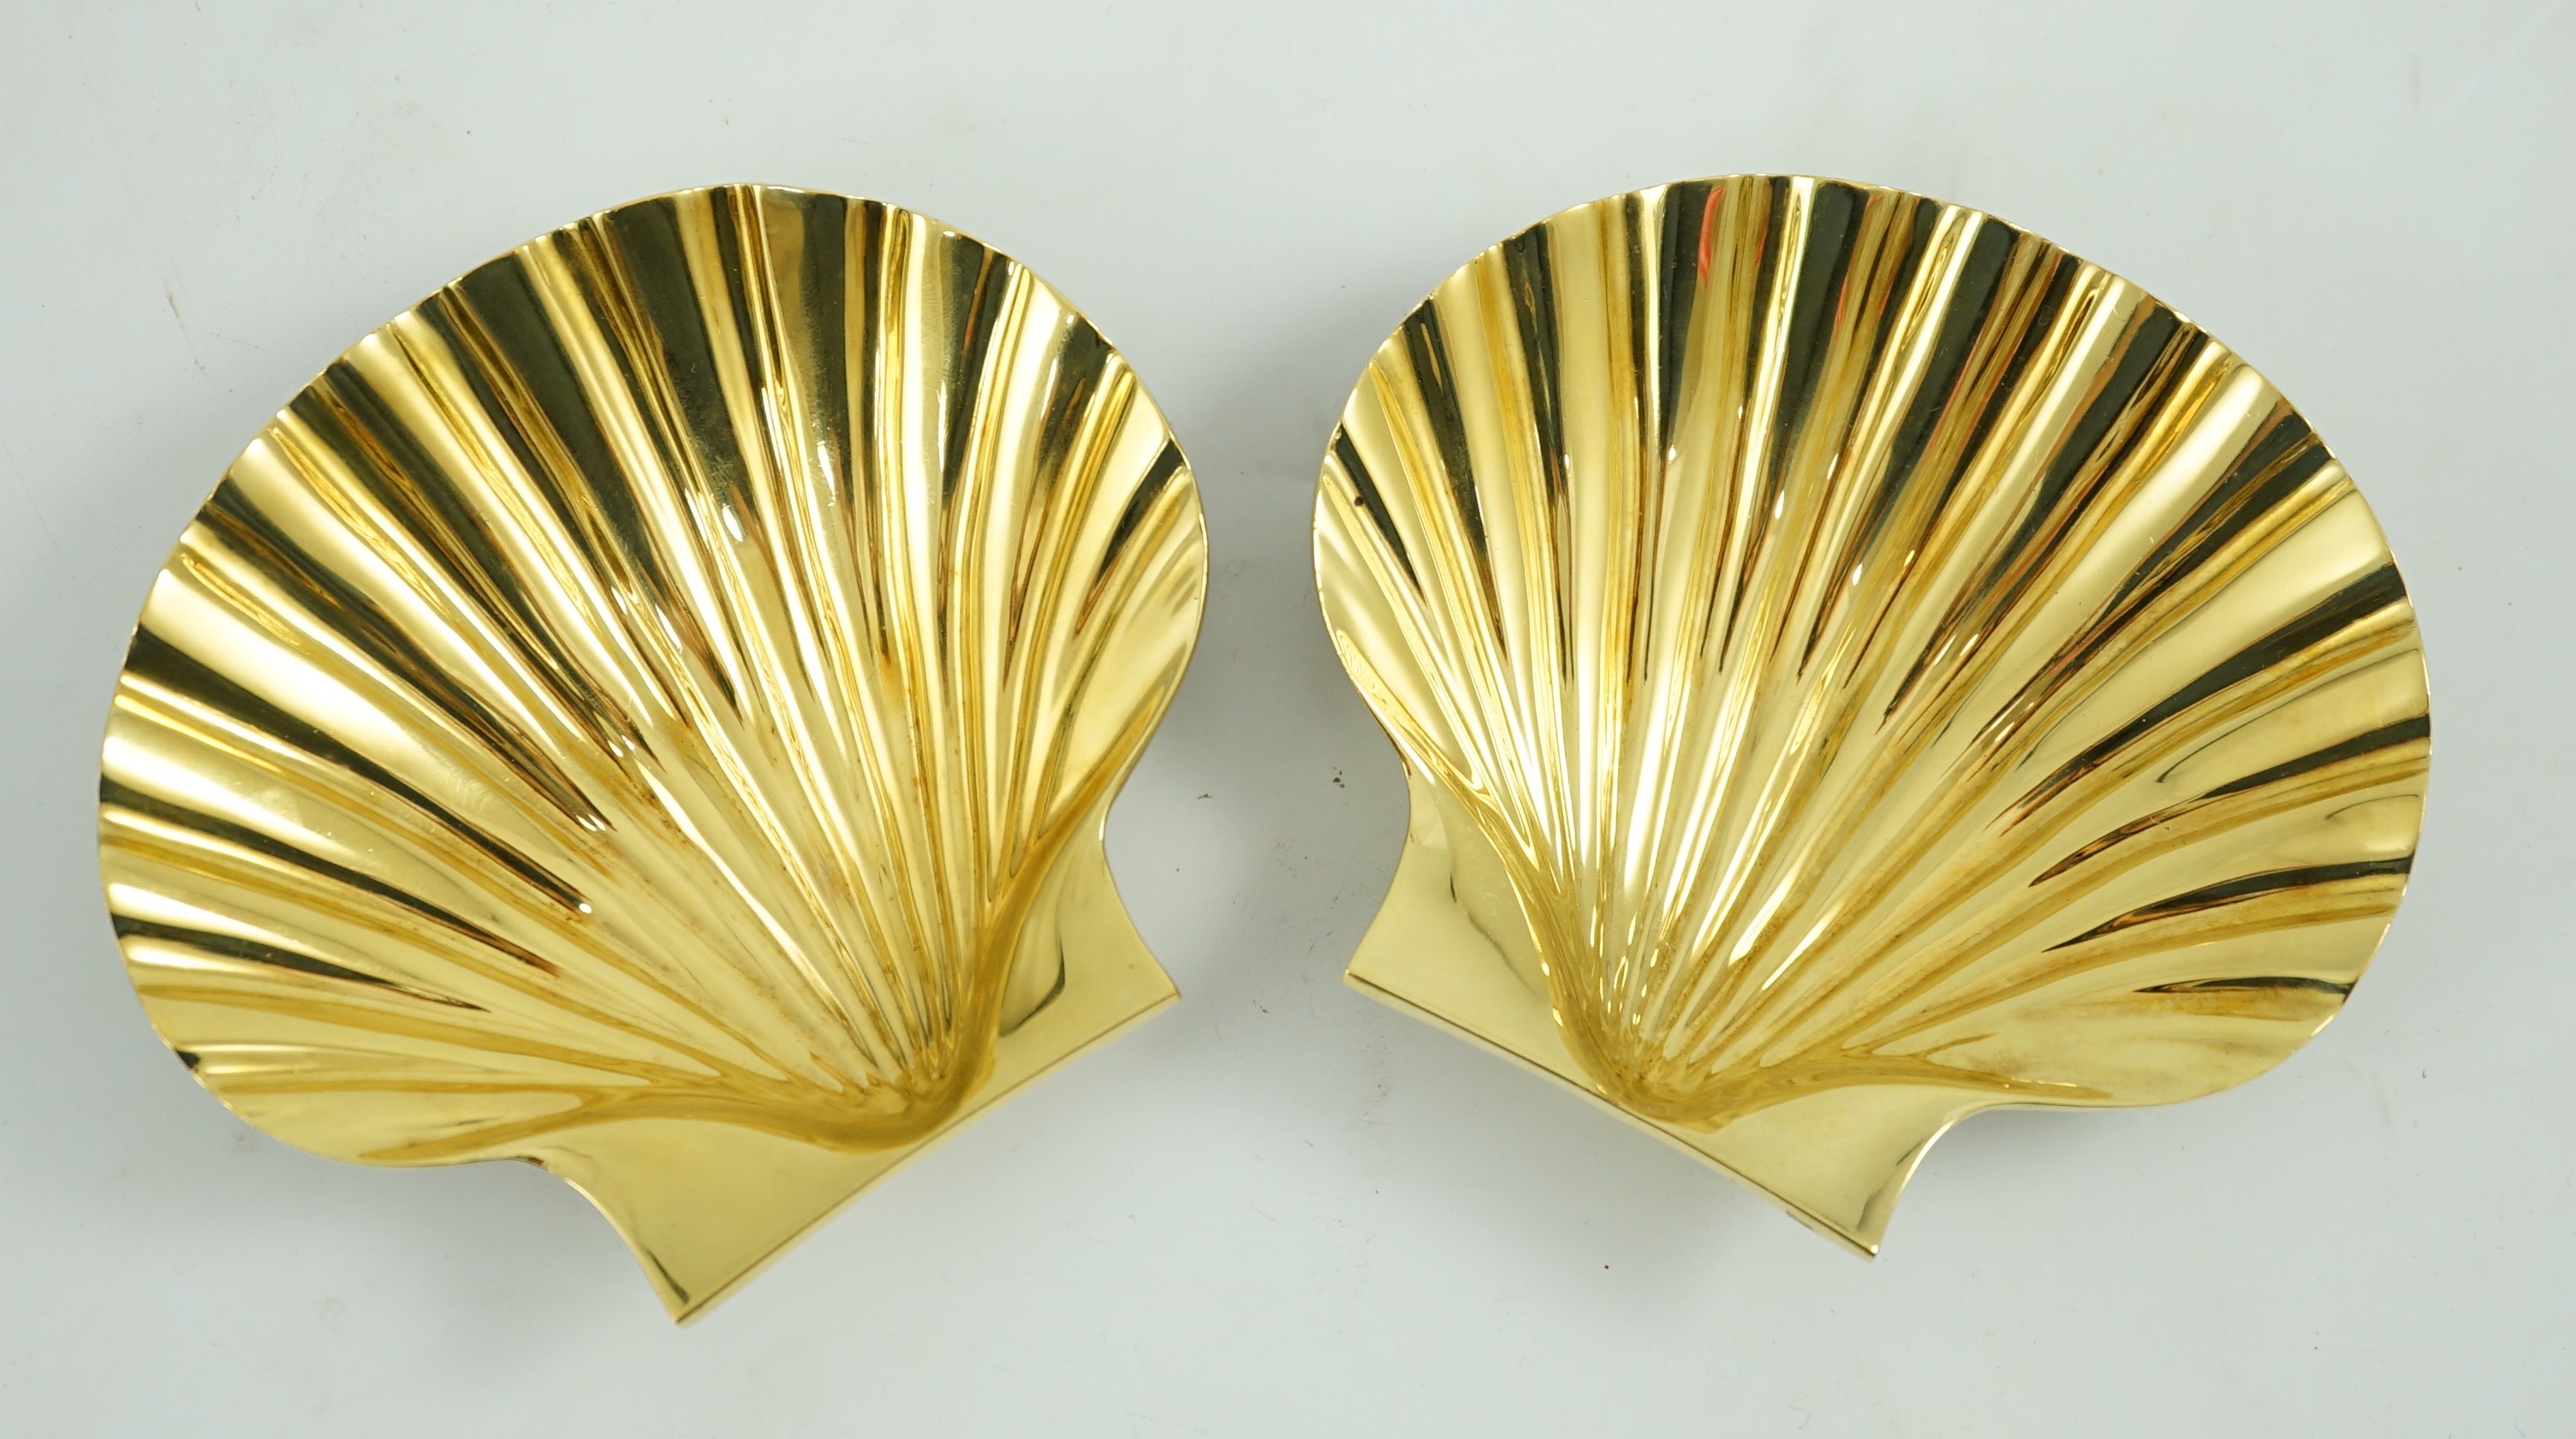 A cased pair of Elizabeth II silver gilt scallop shell butter dishes by Collingwood & Co